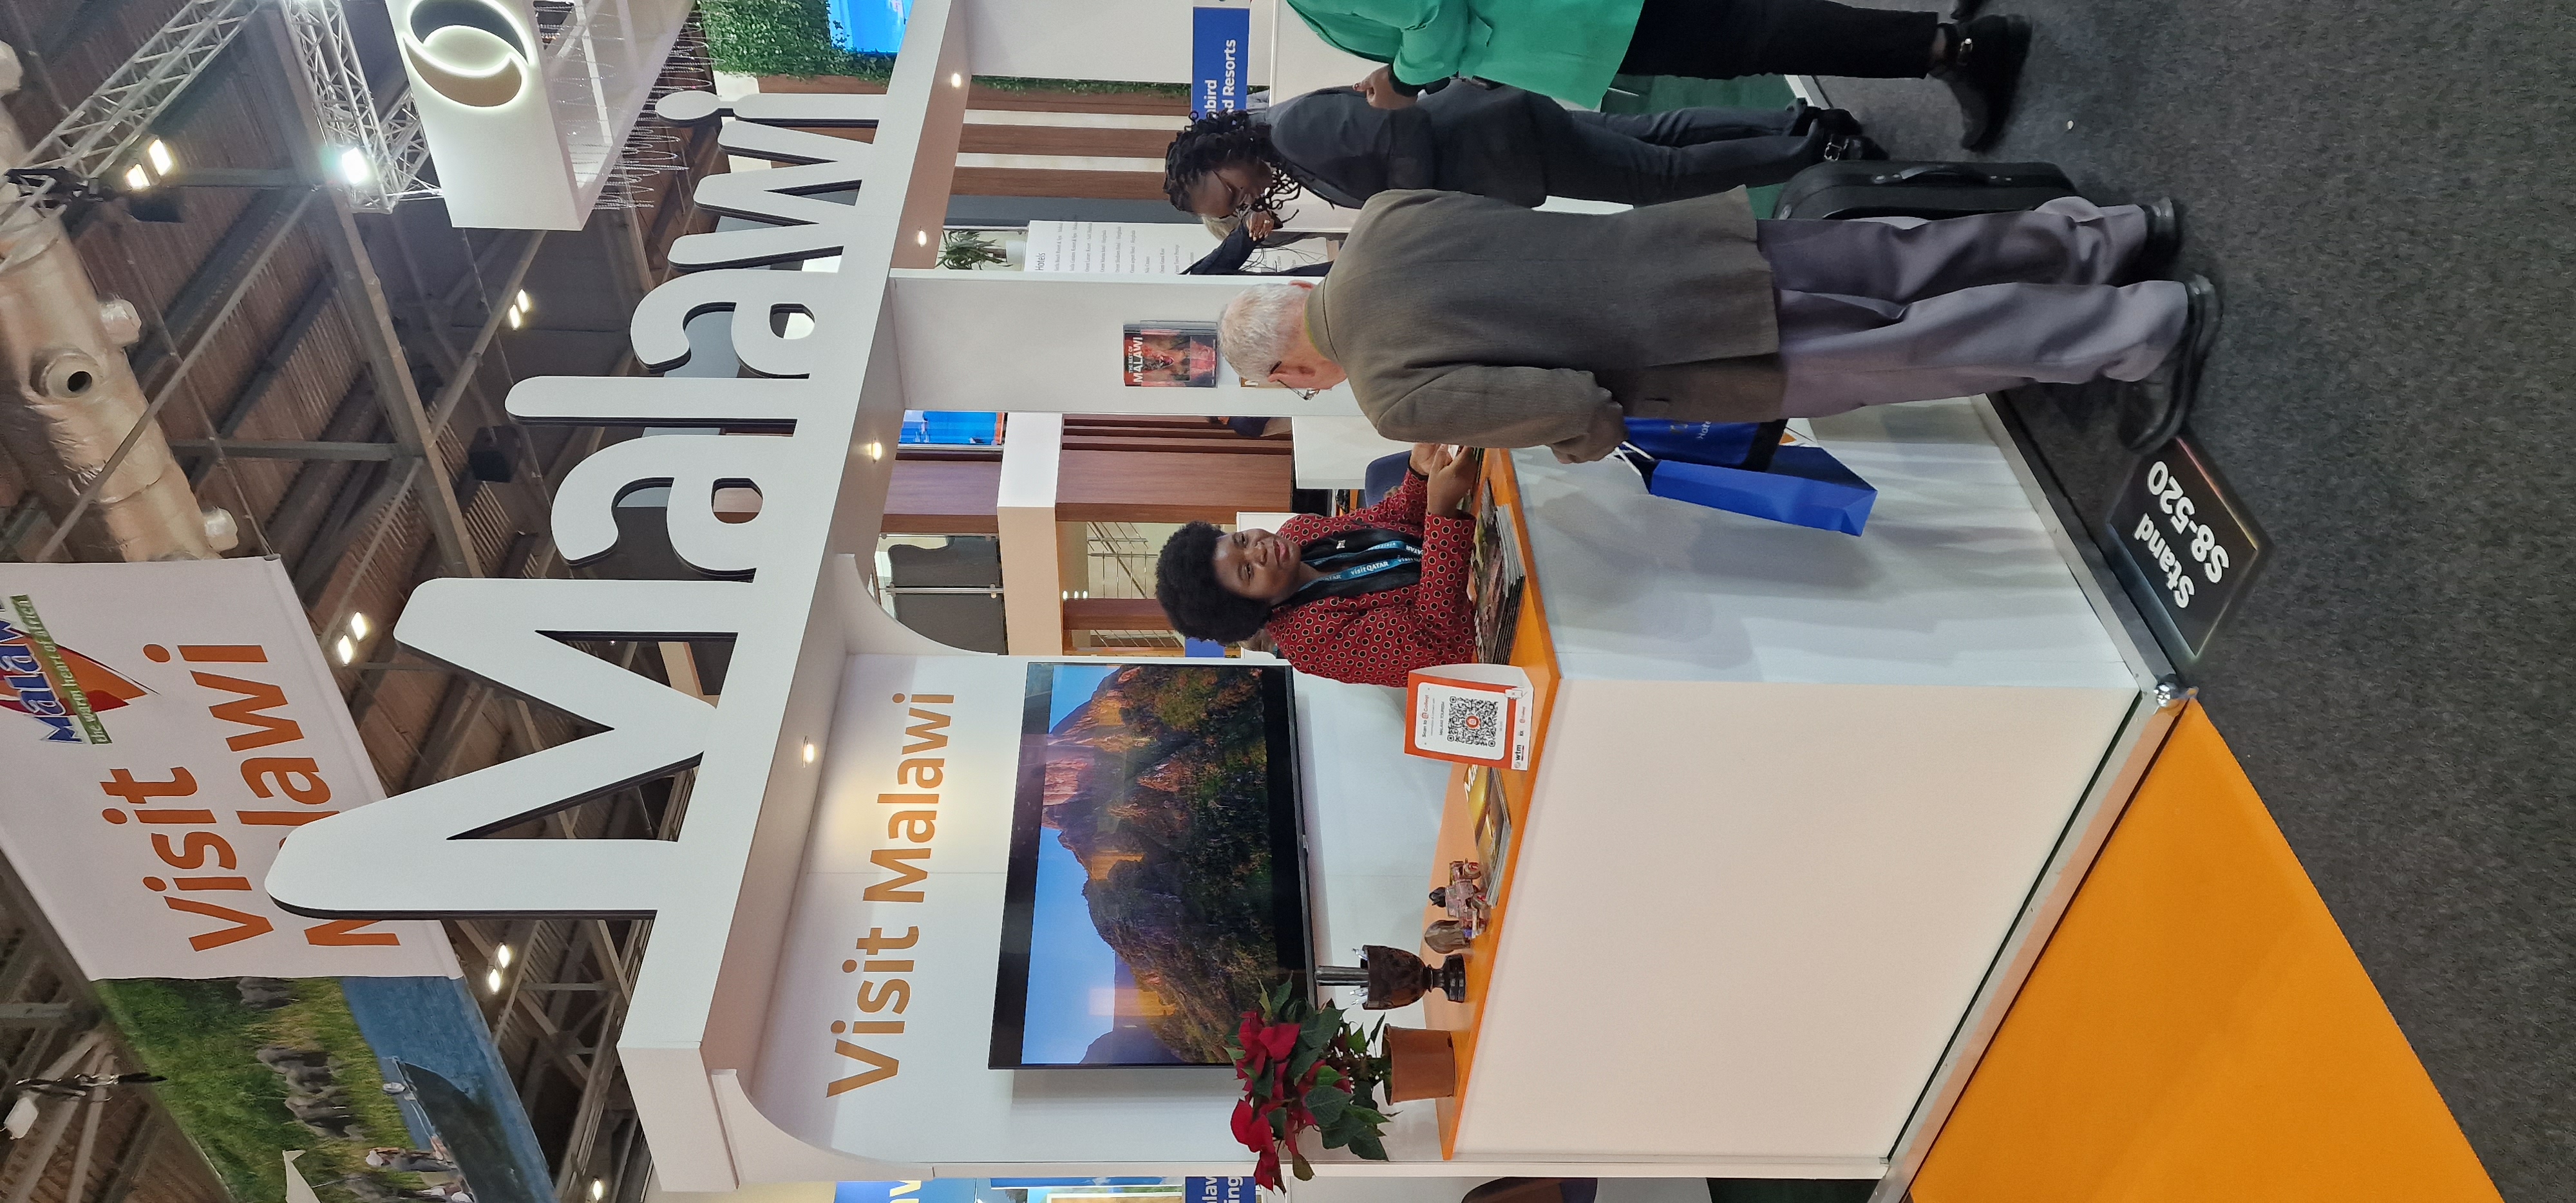 Malawi Tourism at the 2023 World Travel Market in London